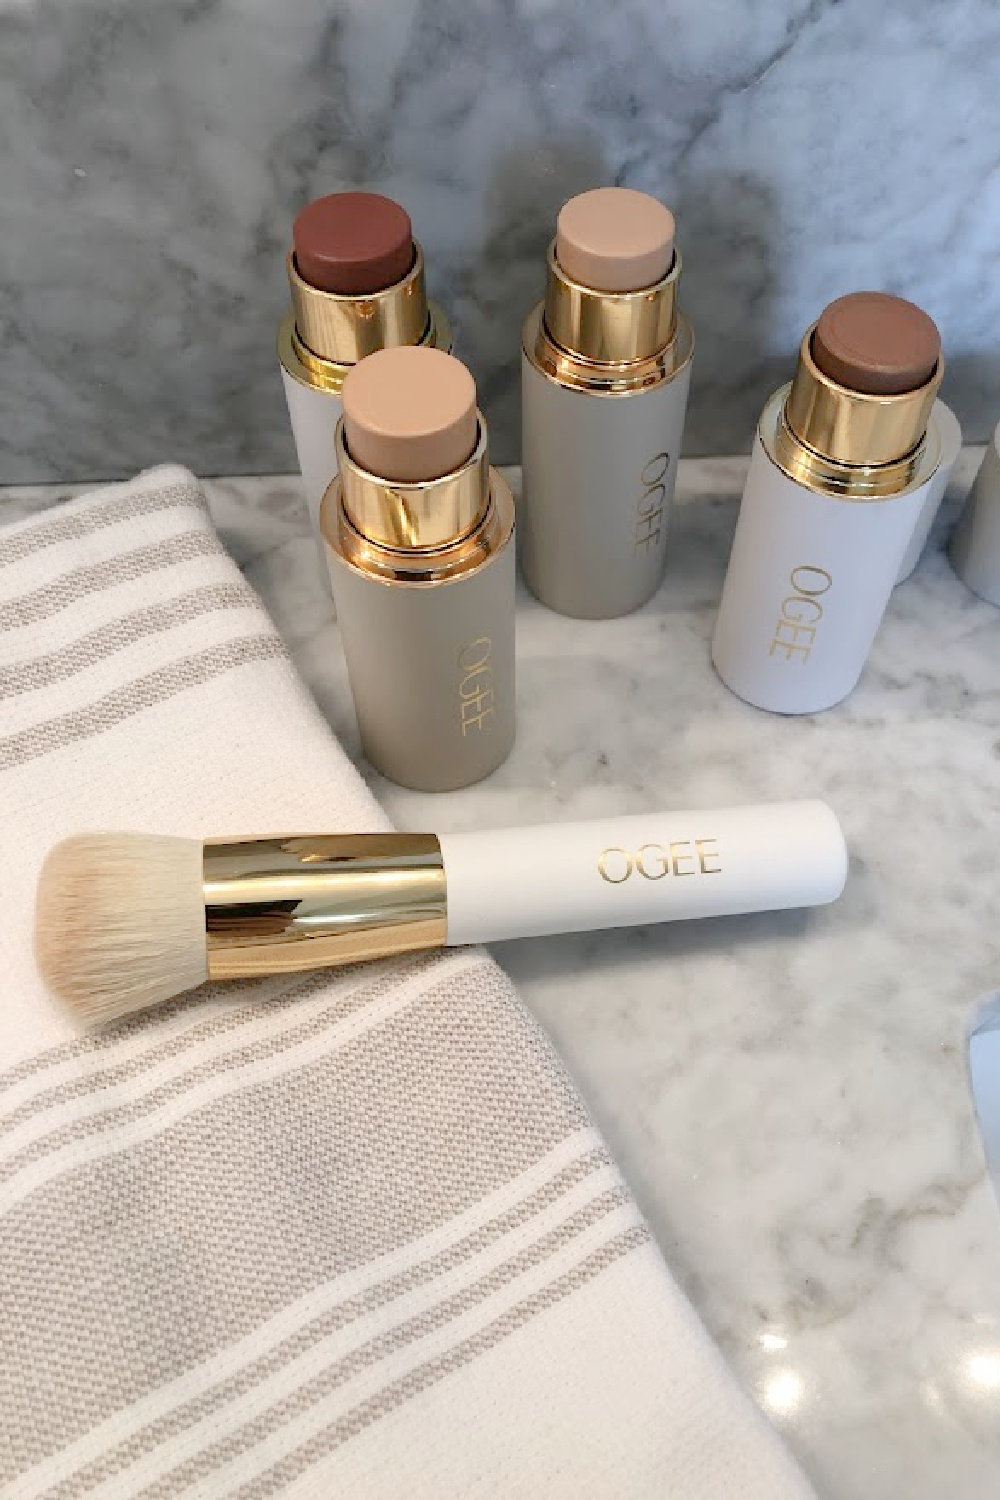 OGEE's organic complexion sticks, face sticks, and blender brush on my vanity - Hello Lovely Studio. #organicmakeup #cleanmakeup #ogee